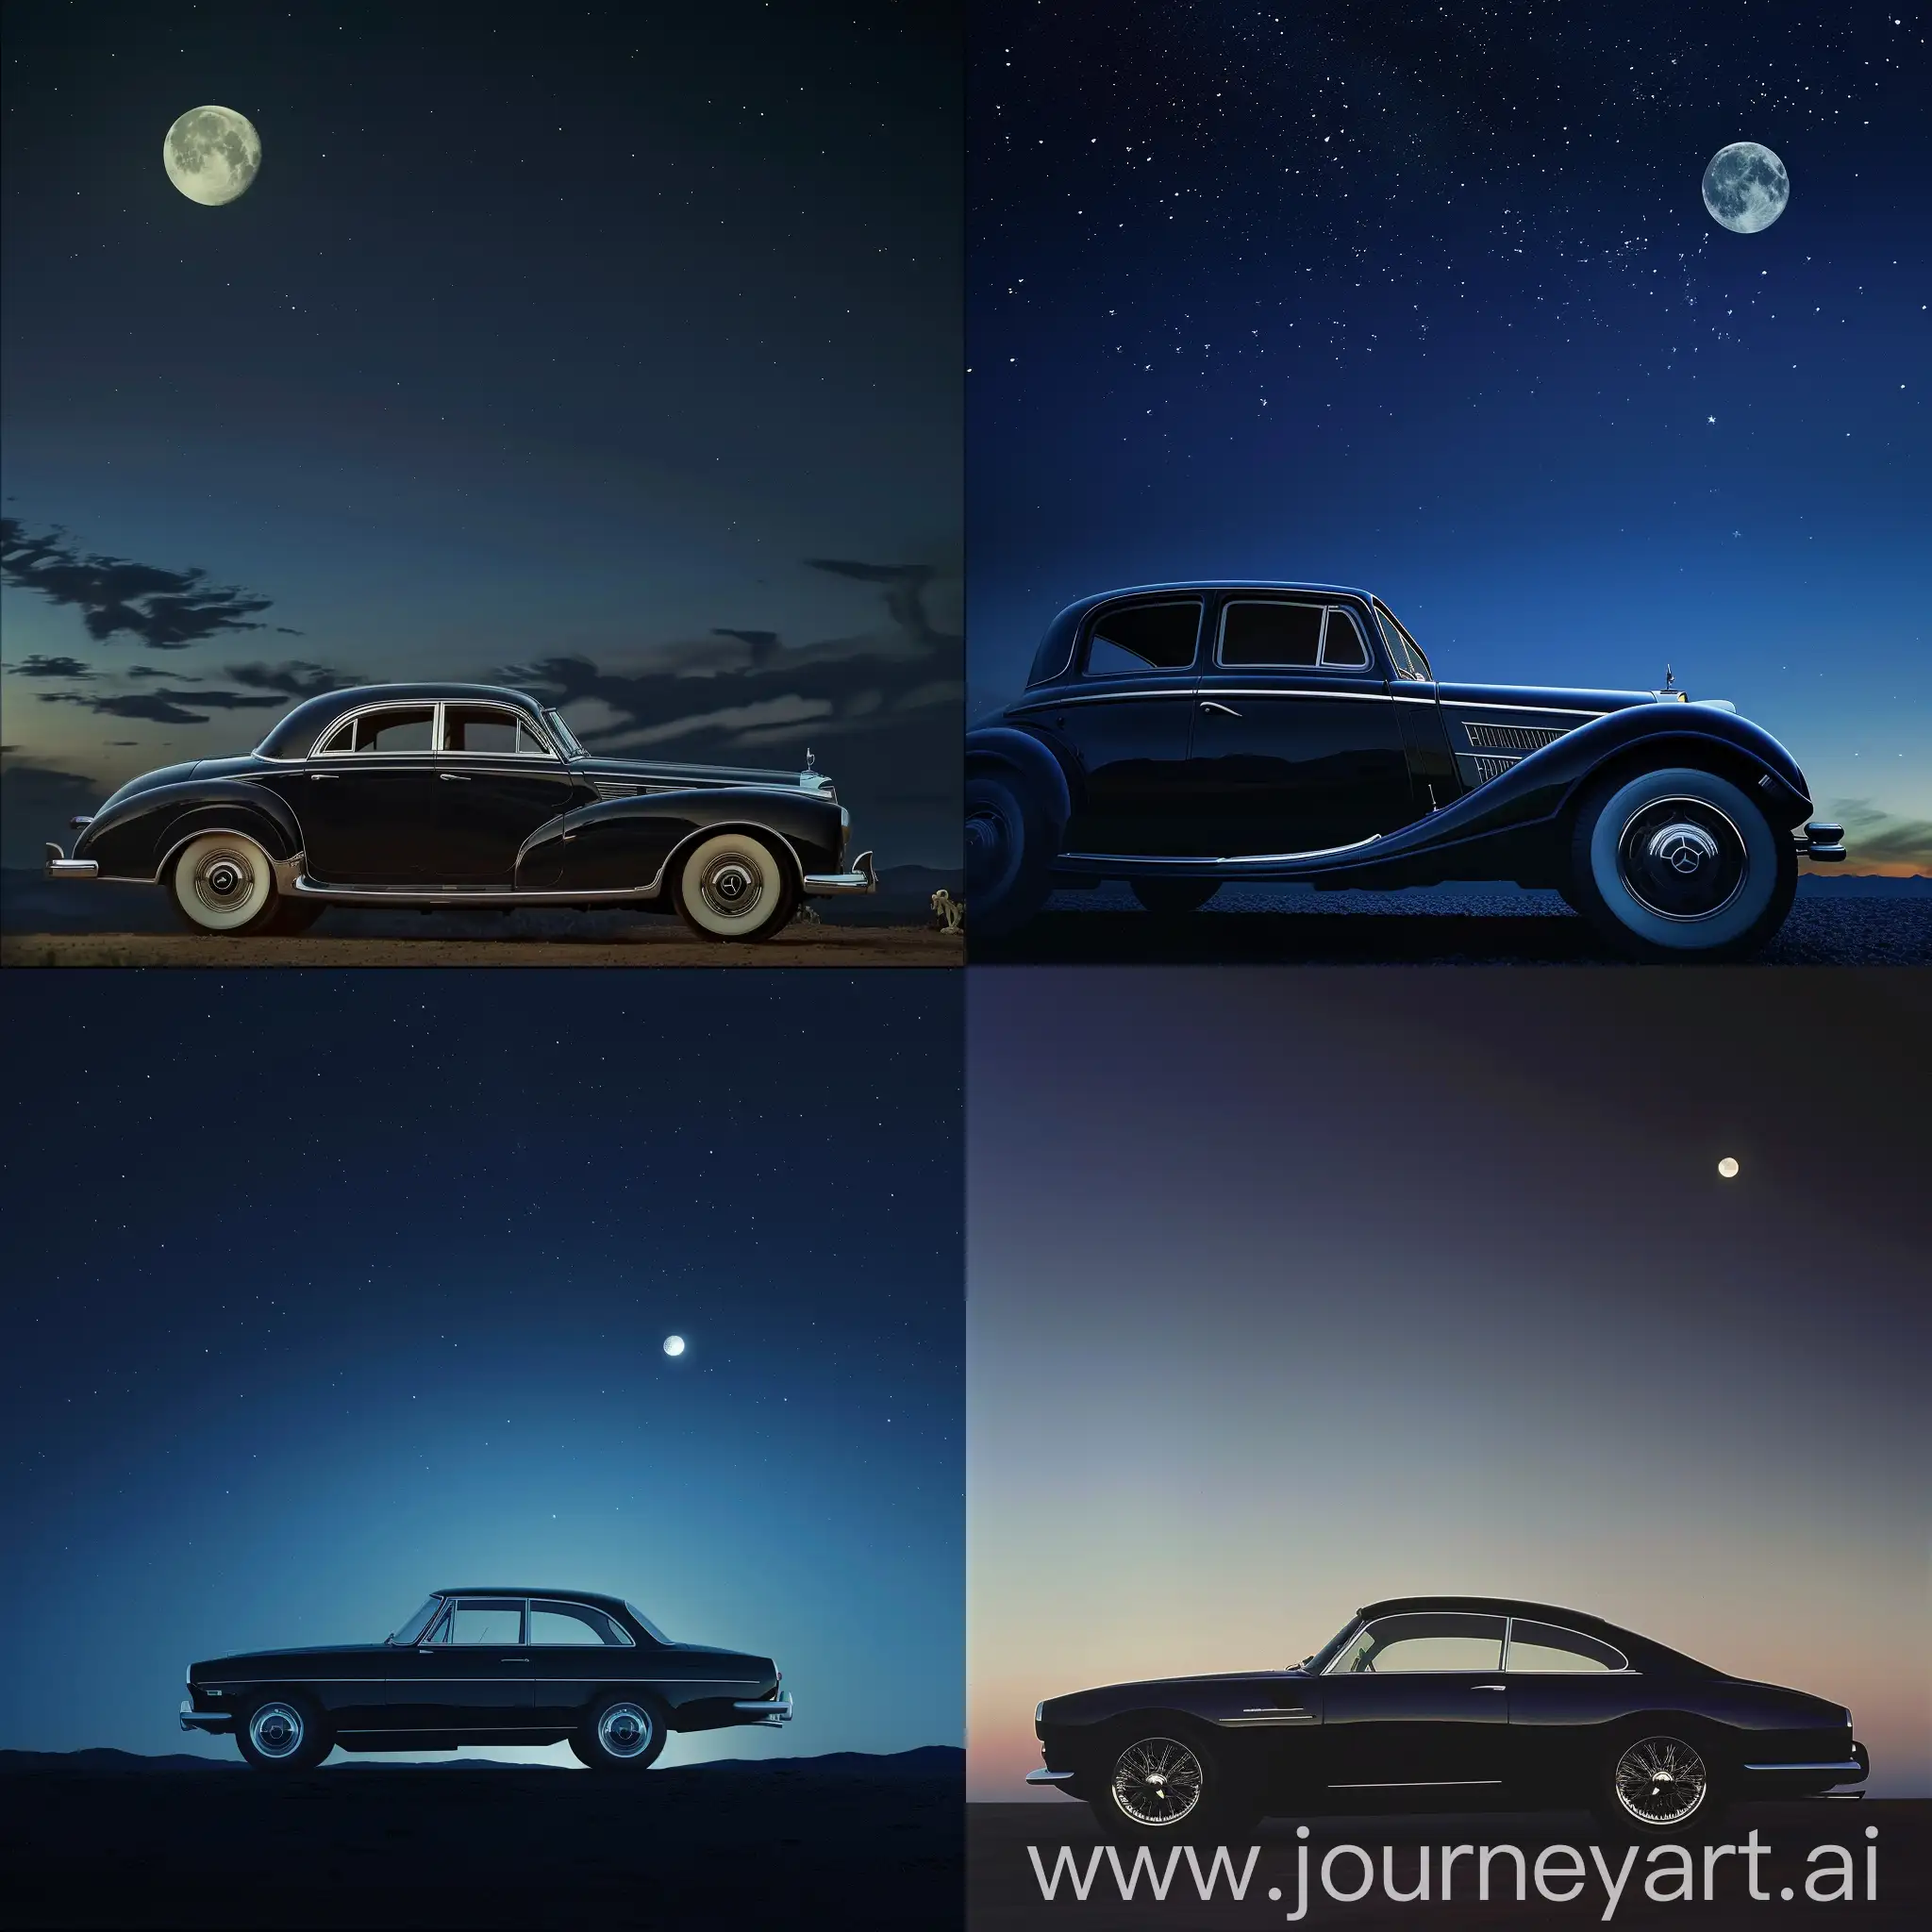 An elegant car stands against the background of the moonlit sky